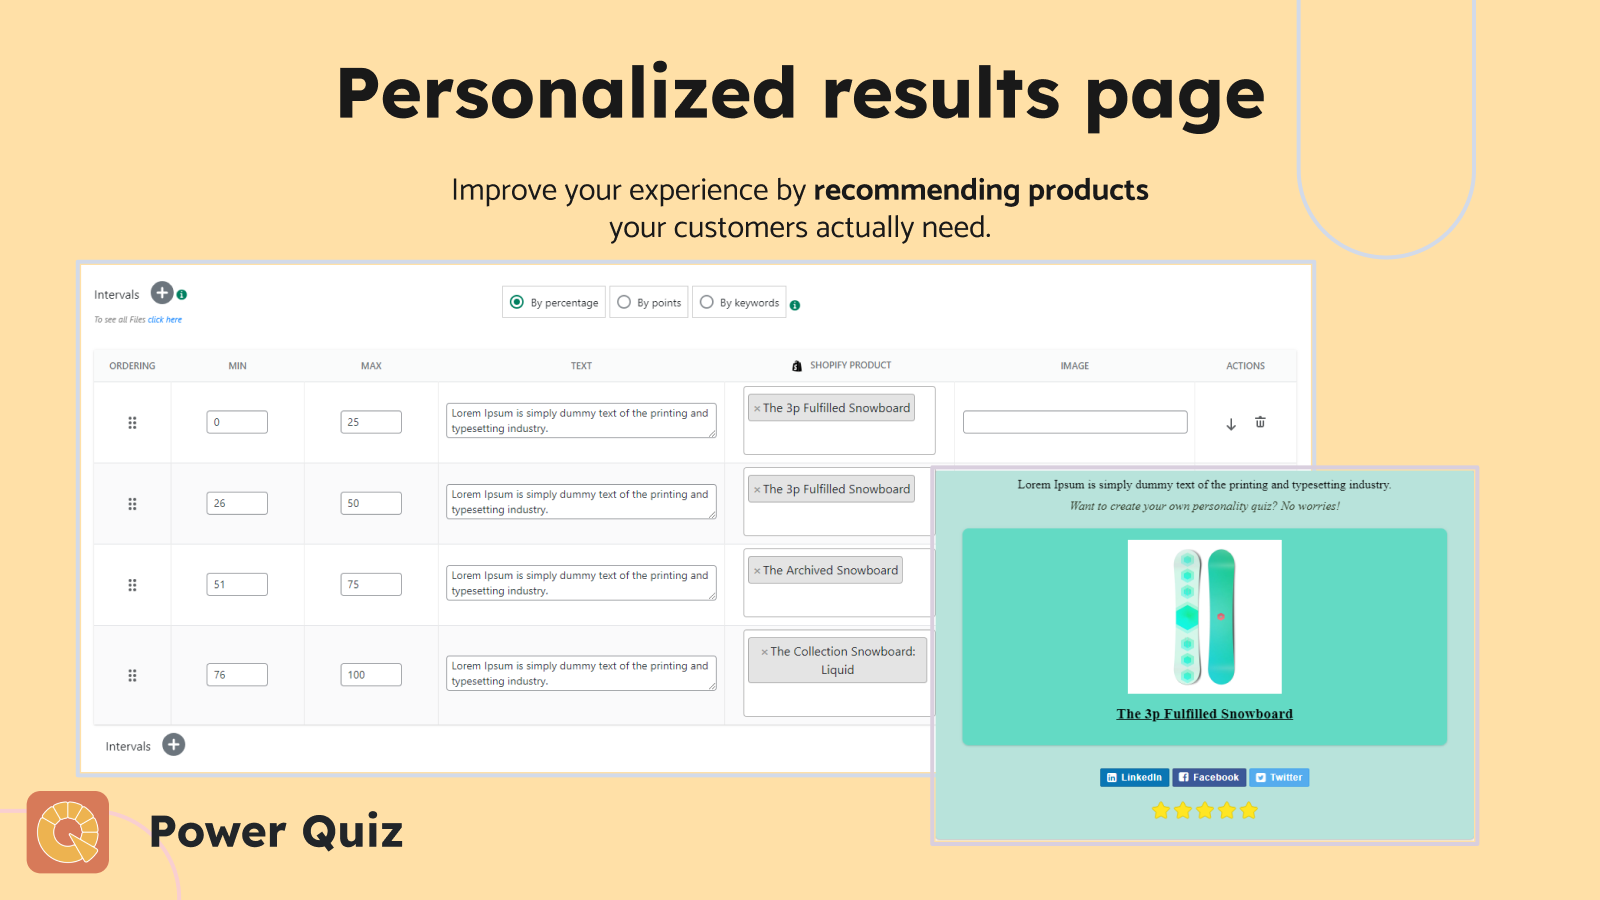 Deliver unique and tailored results pages for each quiz taker.